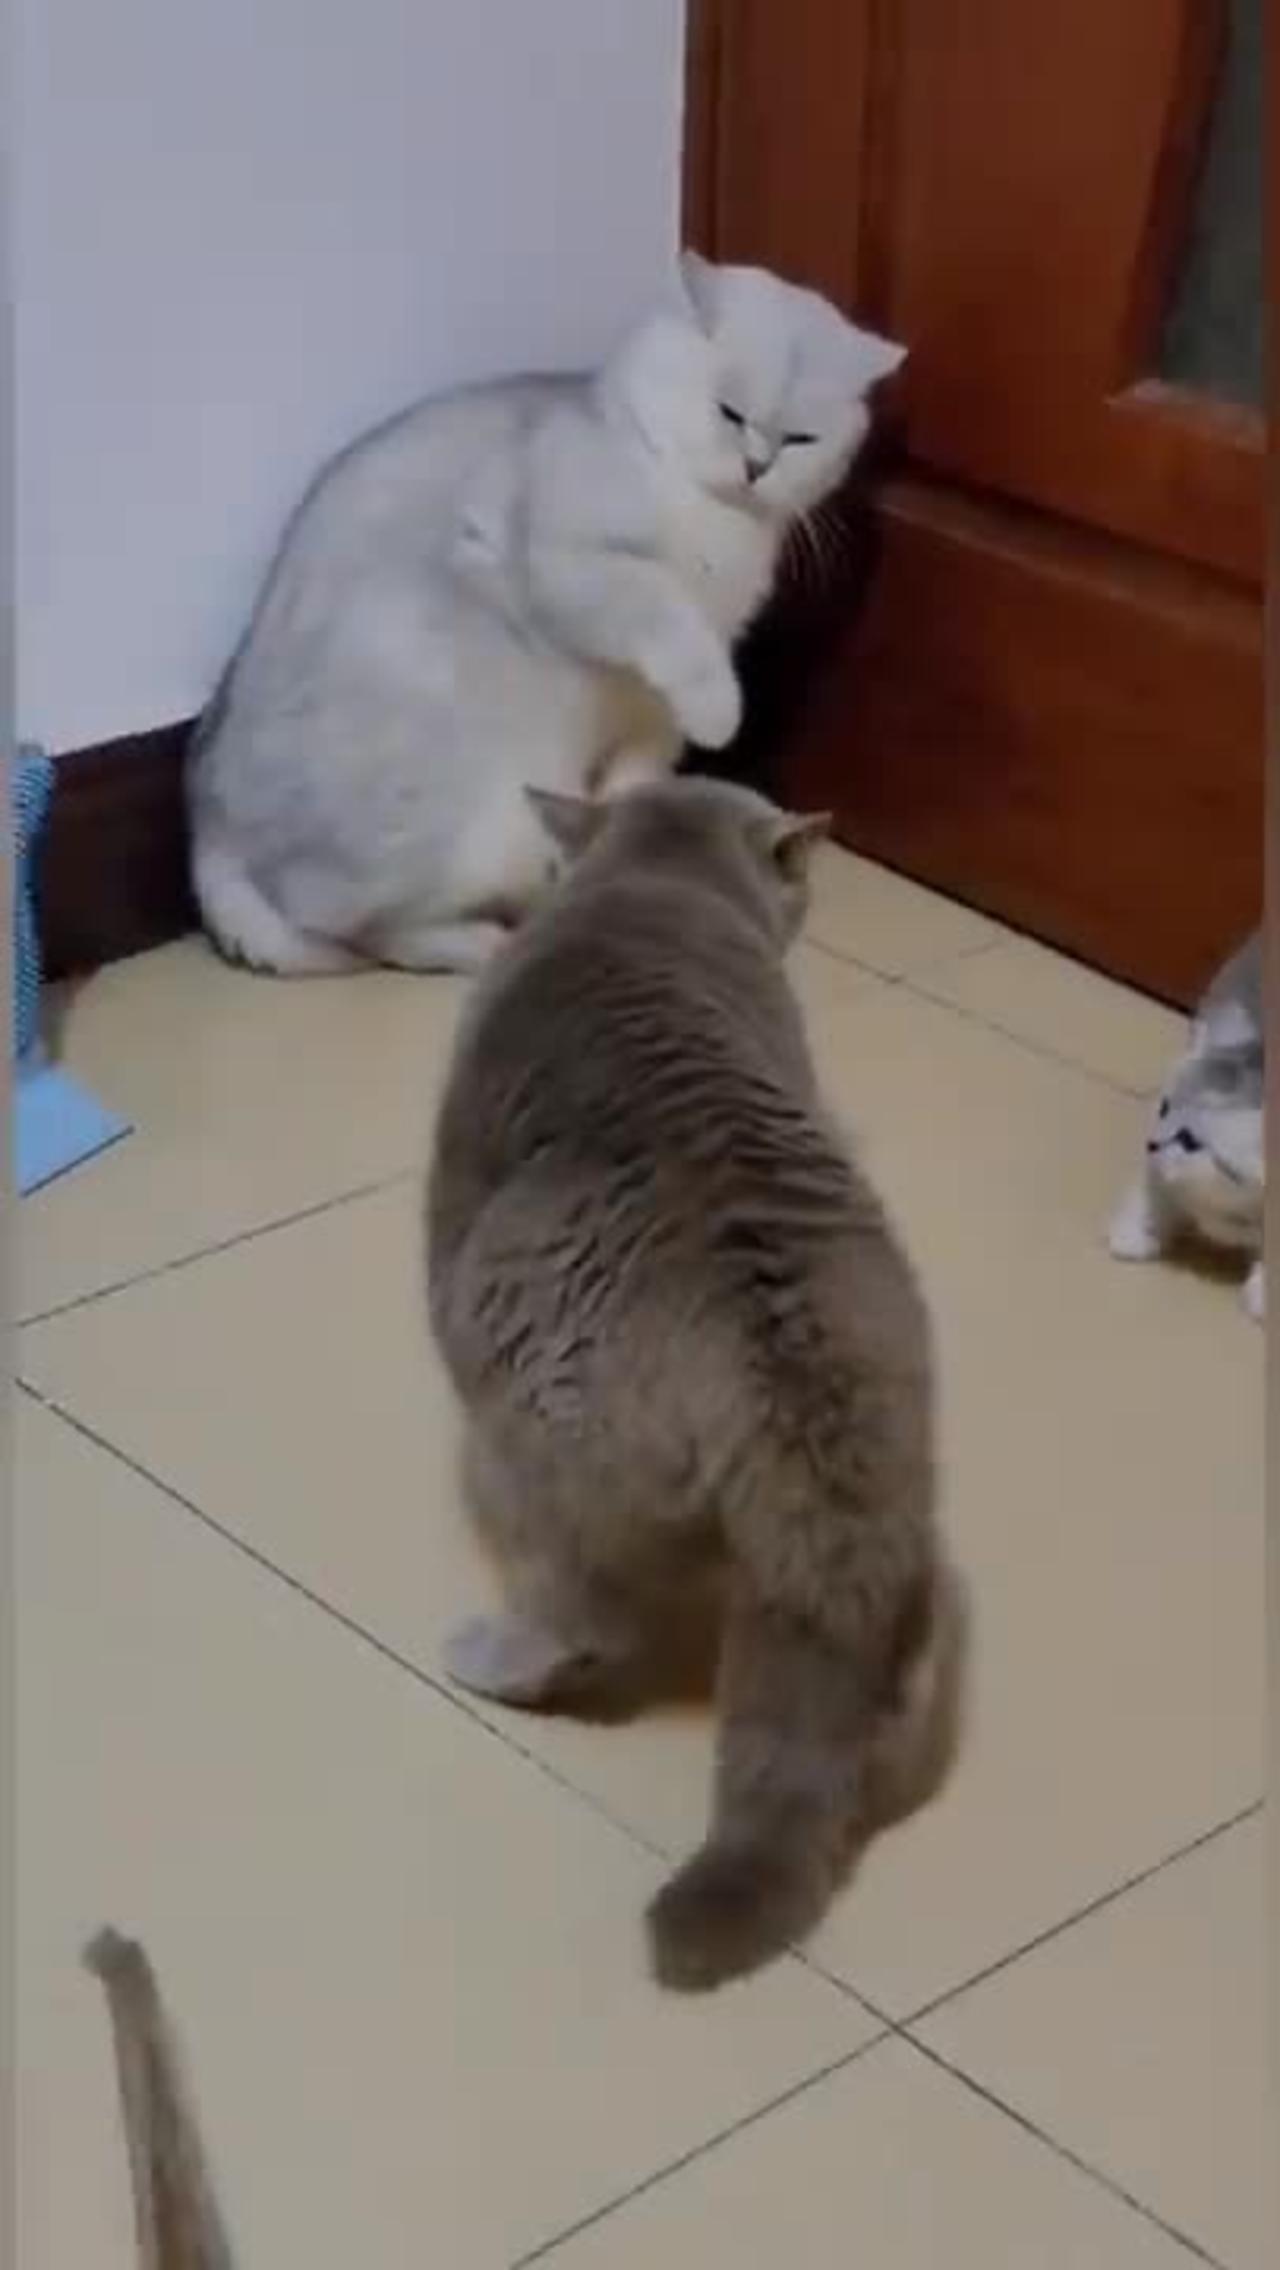 The Battle of the Kitties: A Hilarious Cat Fight Video